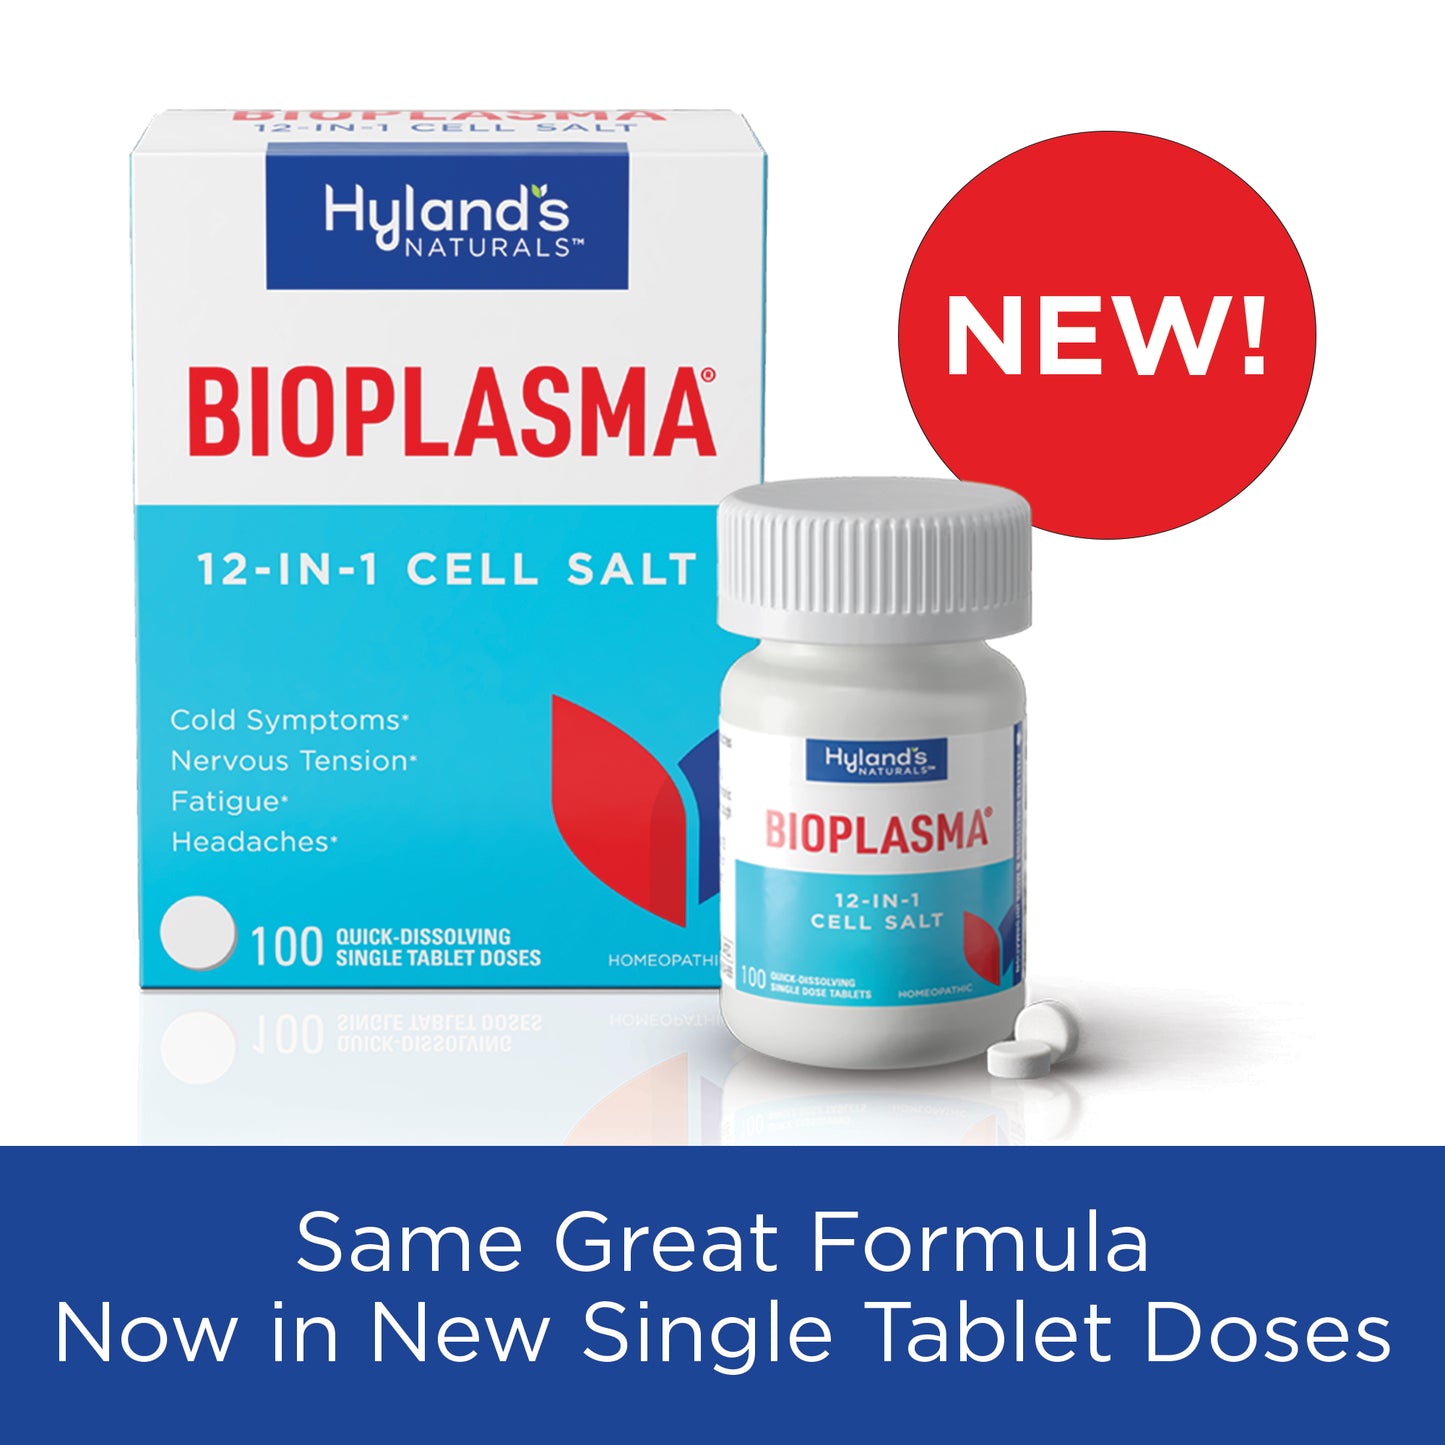 Bioplasma 12-in-1 cell salt packaging and container. 